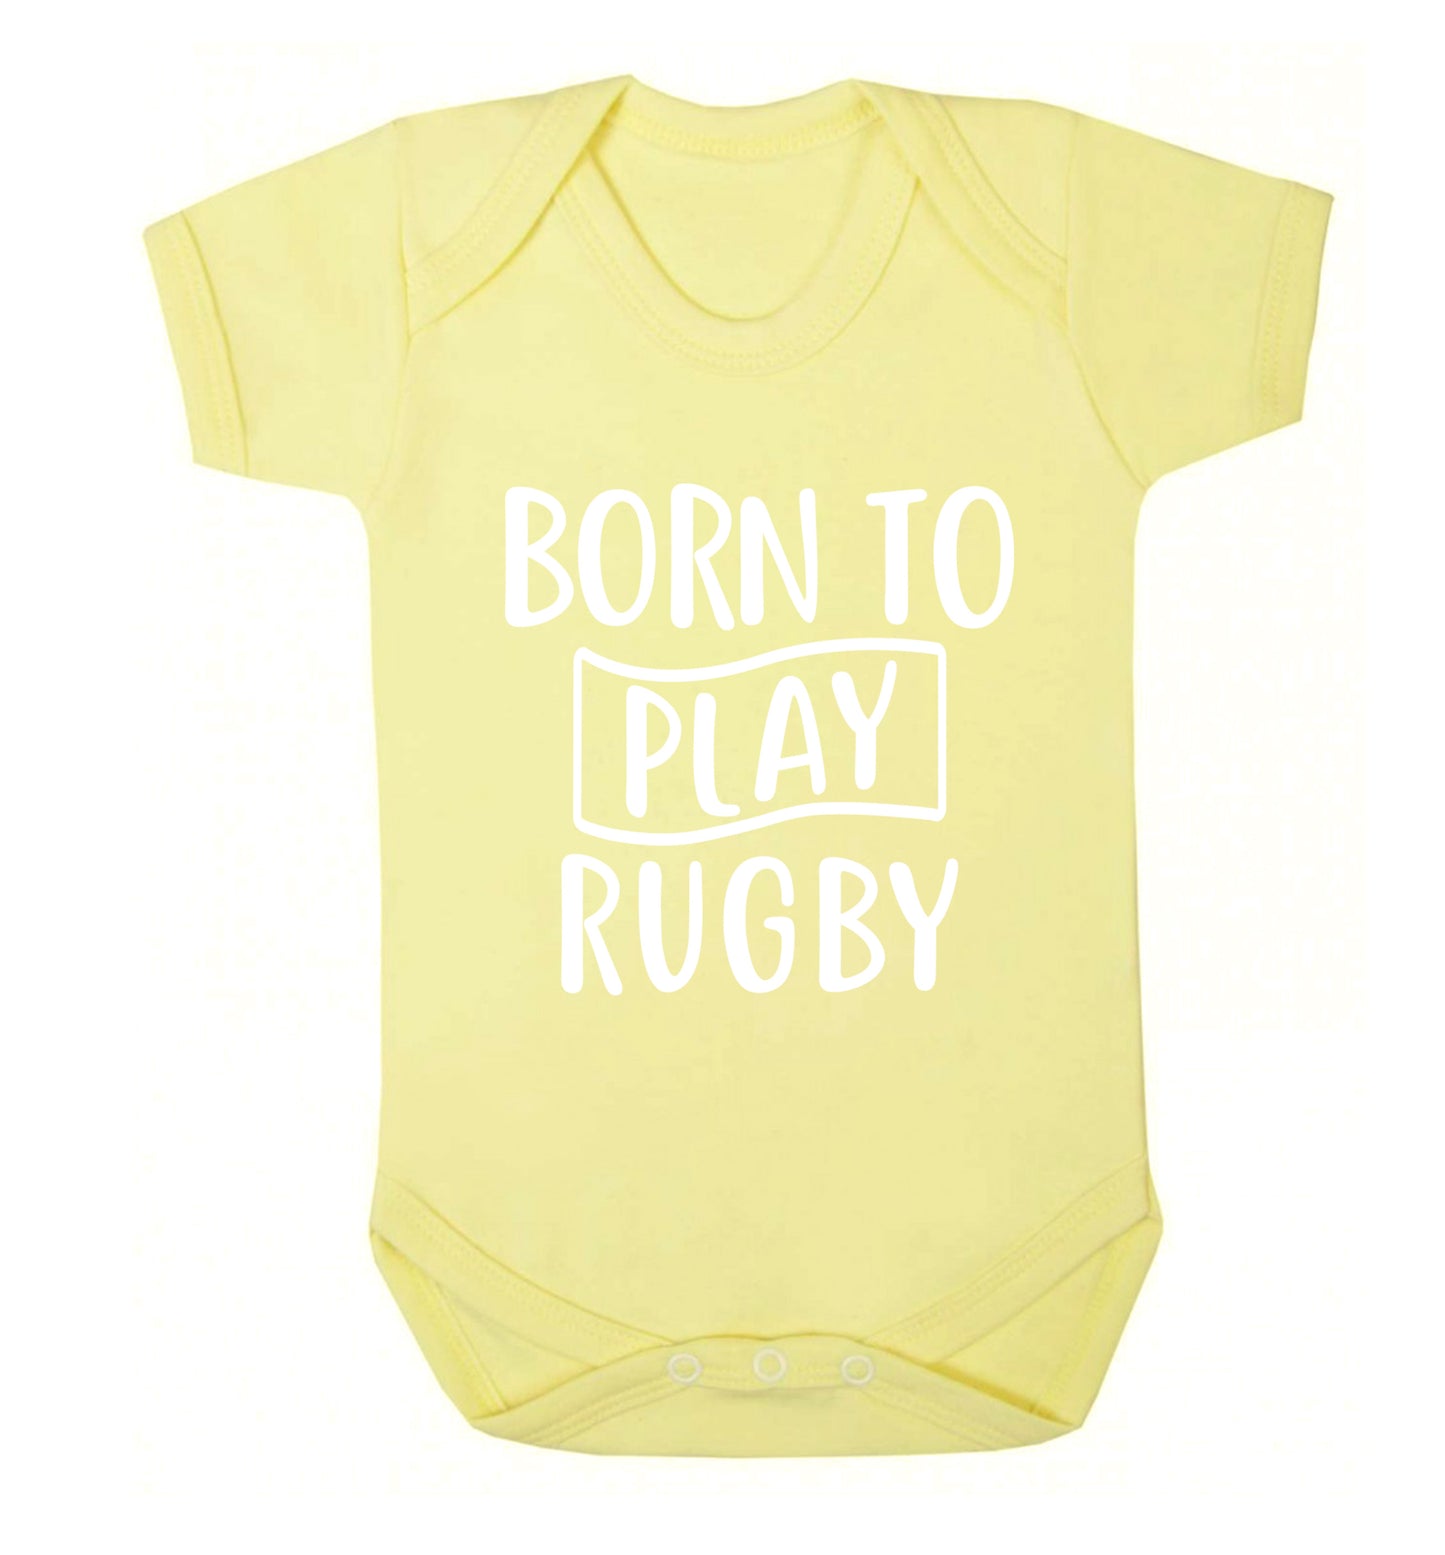 Born to play rugby Baby Vest pale yellow 18-24 months